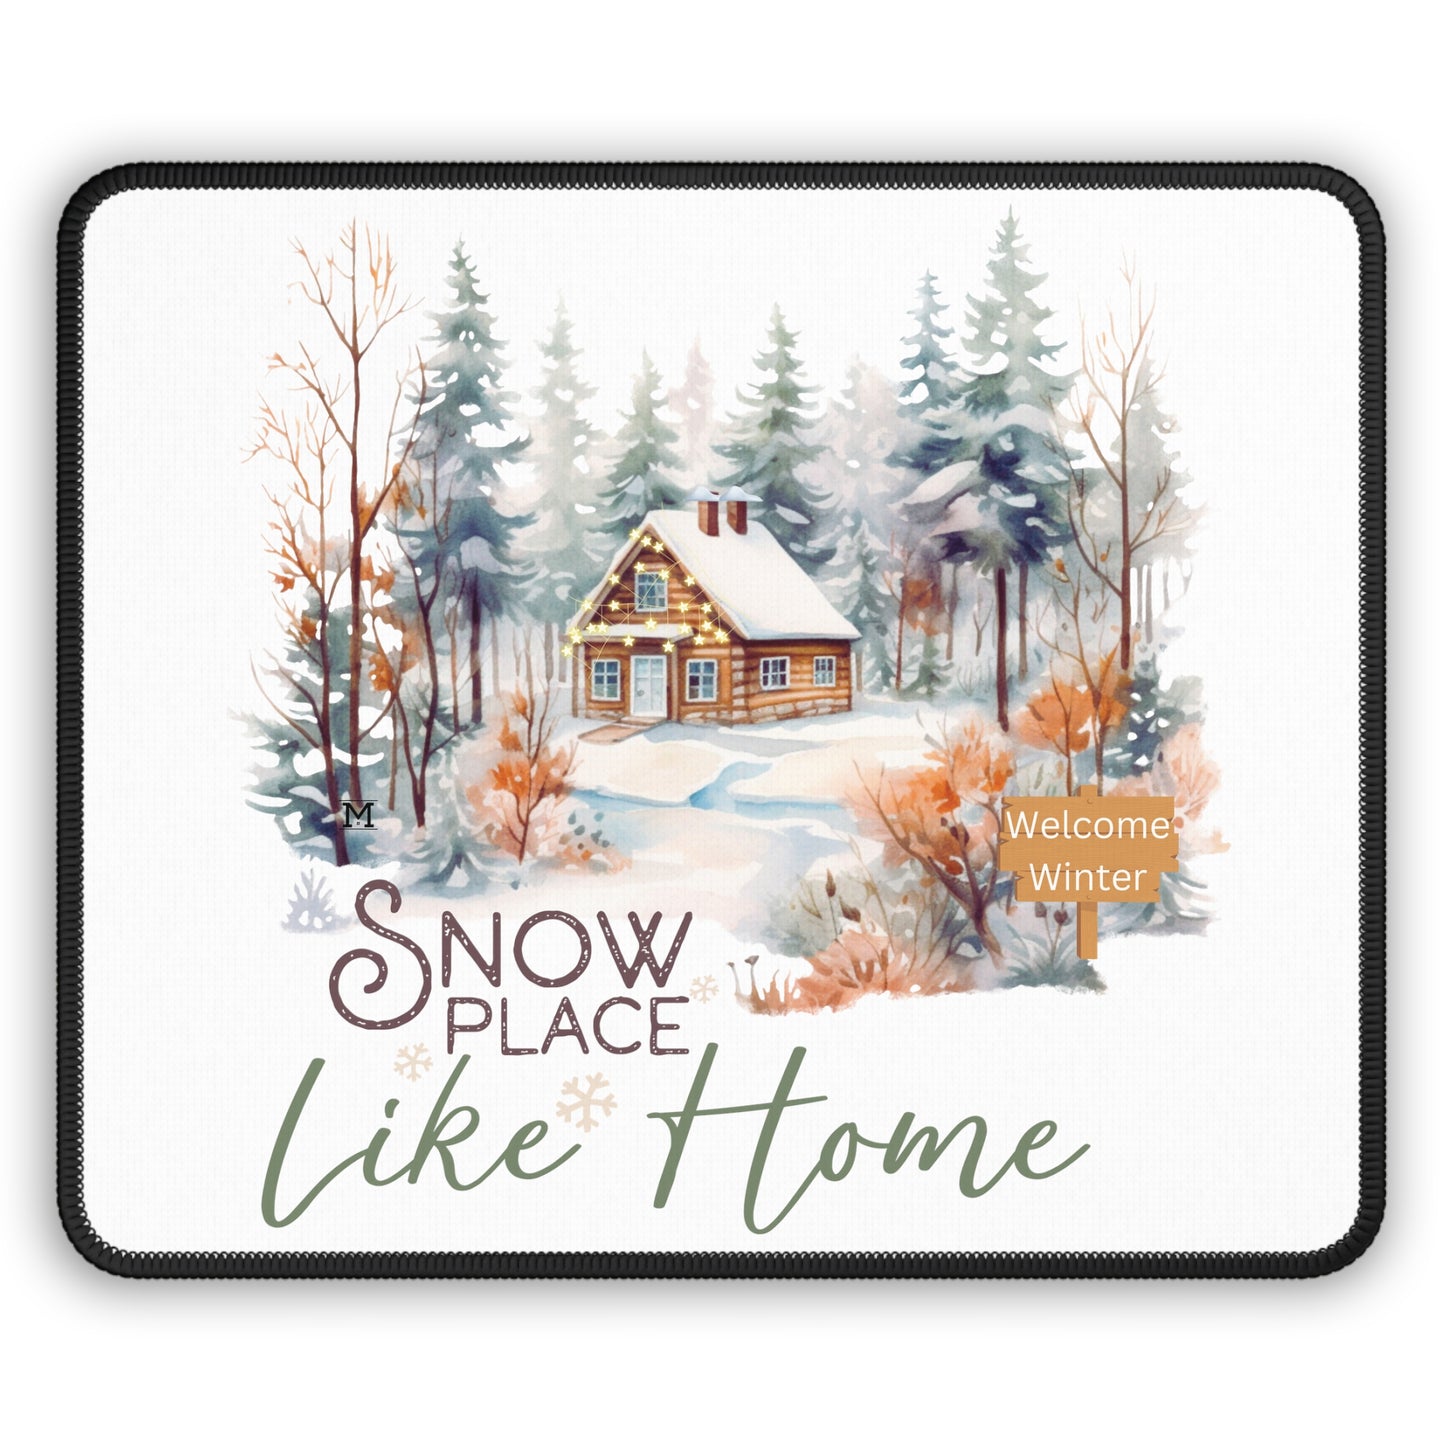 Happy Bright Snow Place Like Home - Country cabin snow trees 'Welcome Winter' white tans gold Cute Beautiful for your Home Designs by  MII Gaming Mouse Pad